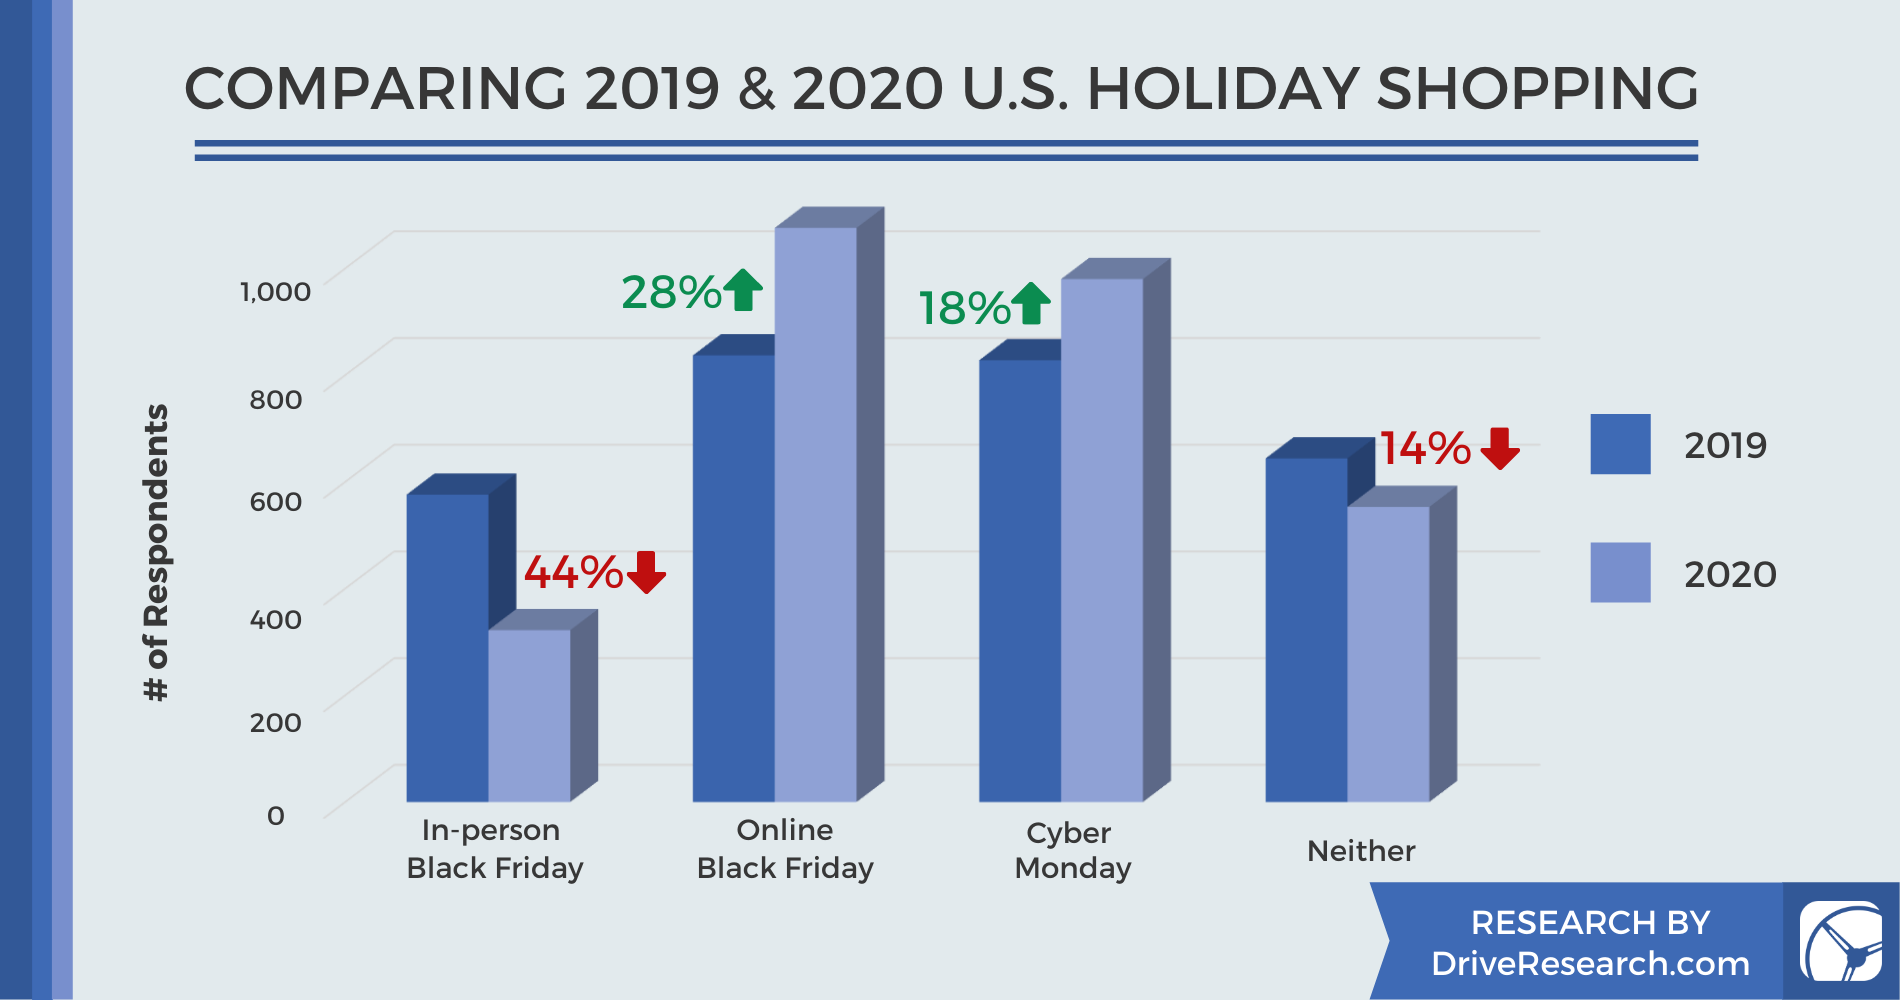 Comparing 2019 & 2020 U.S. Holiday Shopping